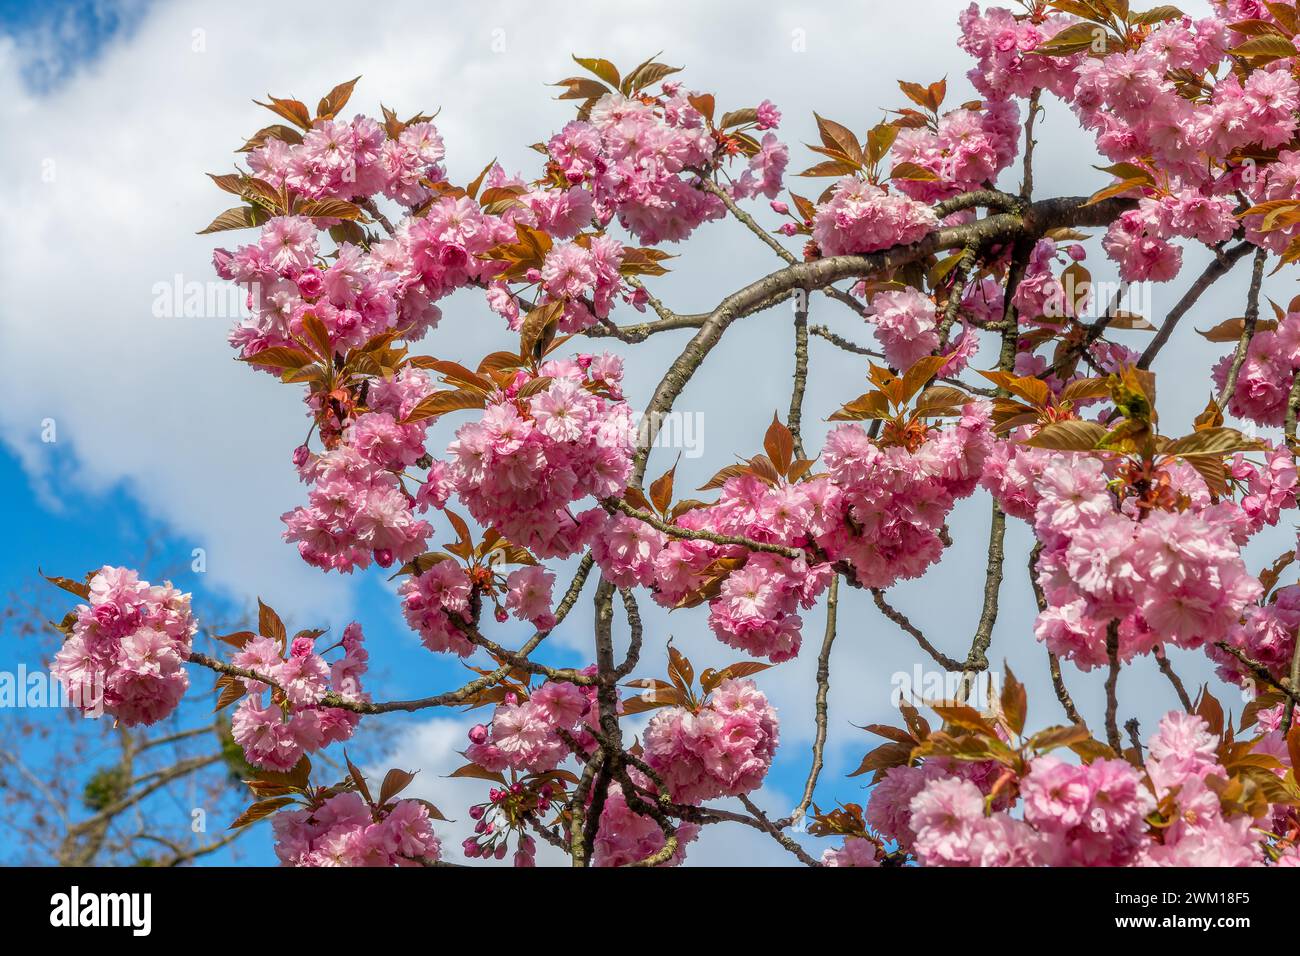 Branch of pink cherry tree in bloom on blue sky background, cherry blossom in spring, hanami season in Japan Stock Photo